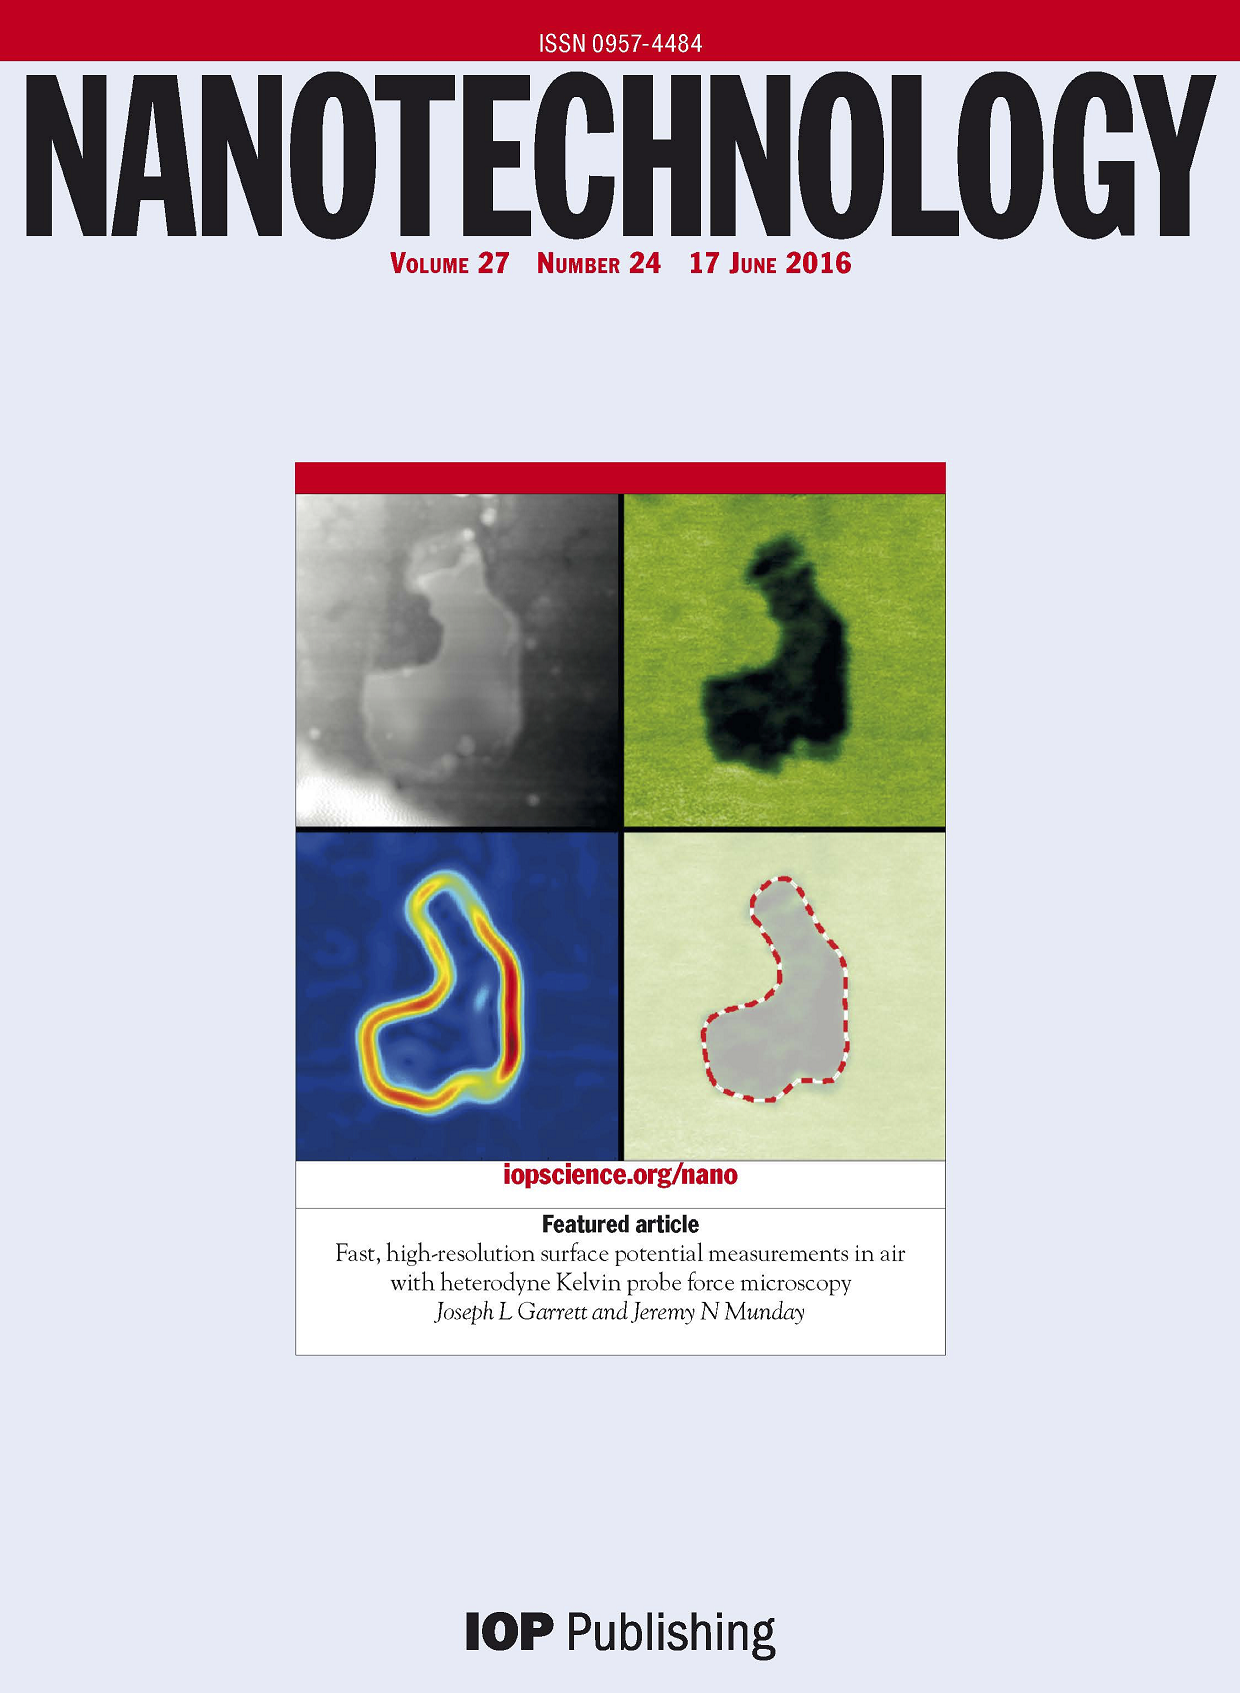 Cover of the June Issue of Nanotechnology